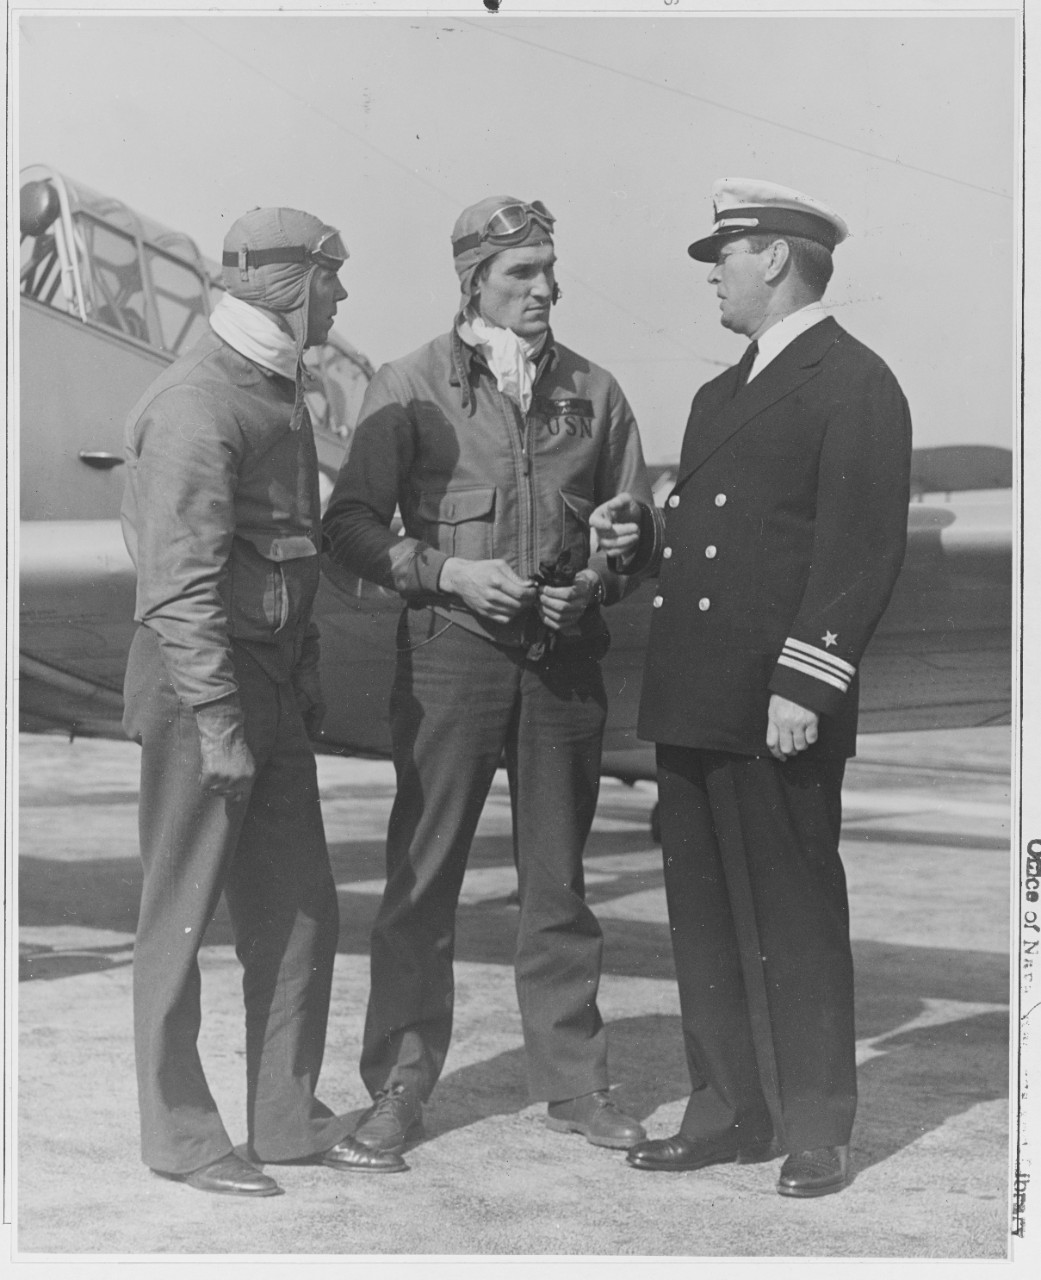 Lt. Comdr. J. J. (Gene) Tunney the Navy new athletic director, talking to cadets B.T. rude and D.M. Harmon at the Naval Air Station, Pensacola Fla.